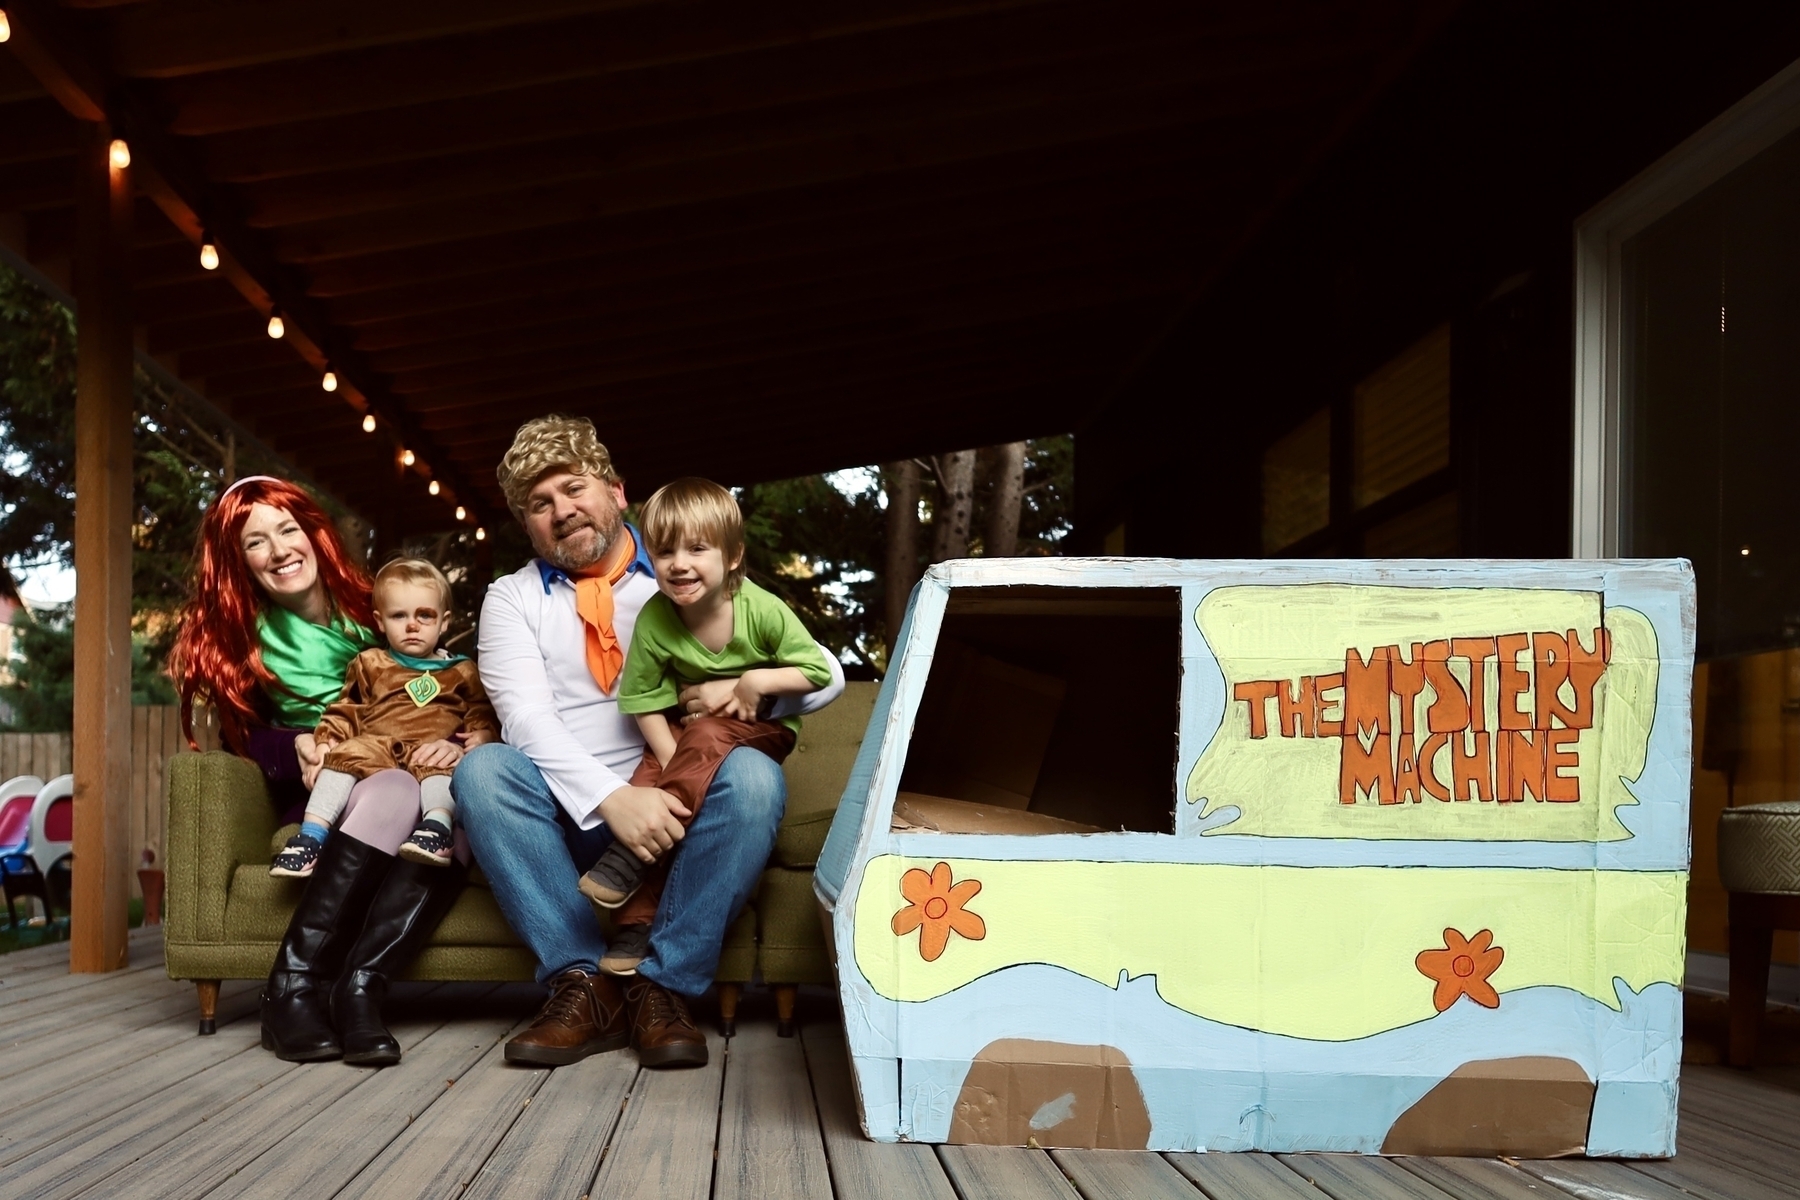 A family of four with two little kids, all dressed like Scooby doo and the gang with a cardboard box painted like the Mystery Machine. The baby is Scooby, the 4 year old is Shaggy, the dad is Fred and the Mom is Daphne. 